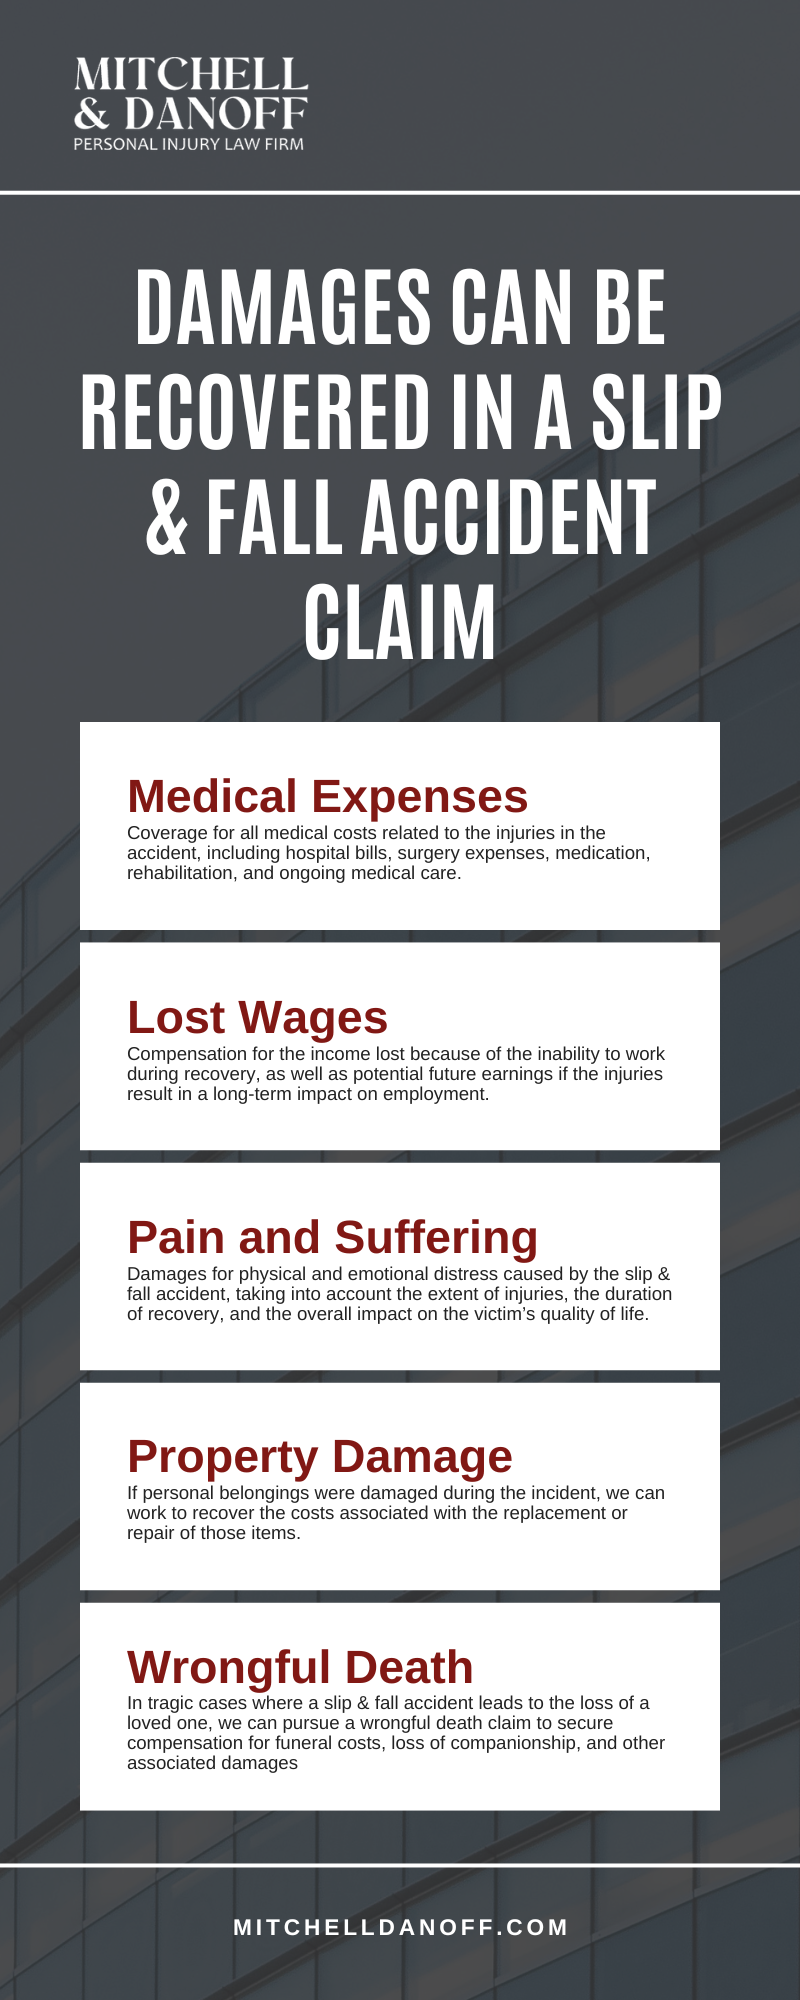 Damages Can Be Recovered In A Slip & Fall Accident Claim Infographic